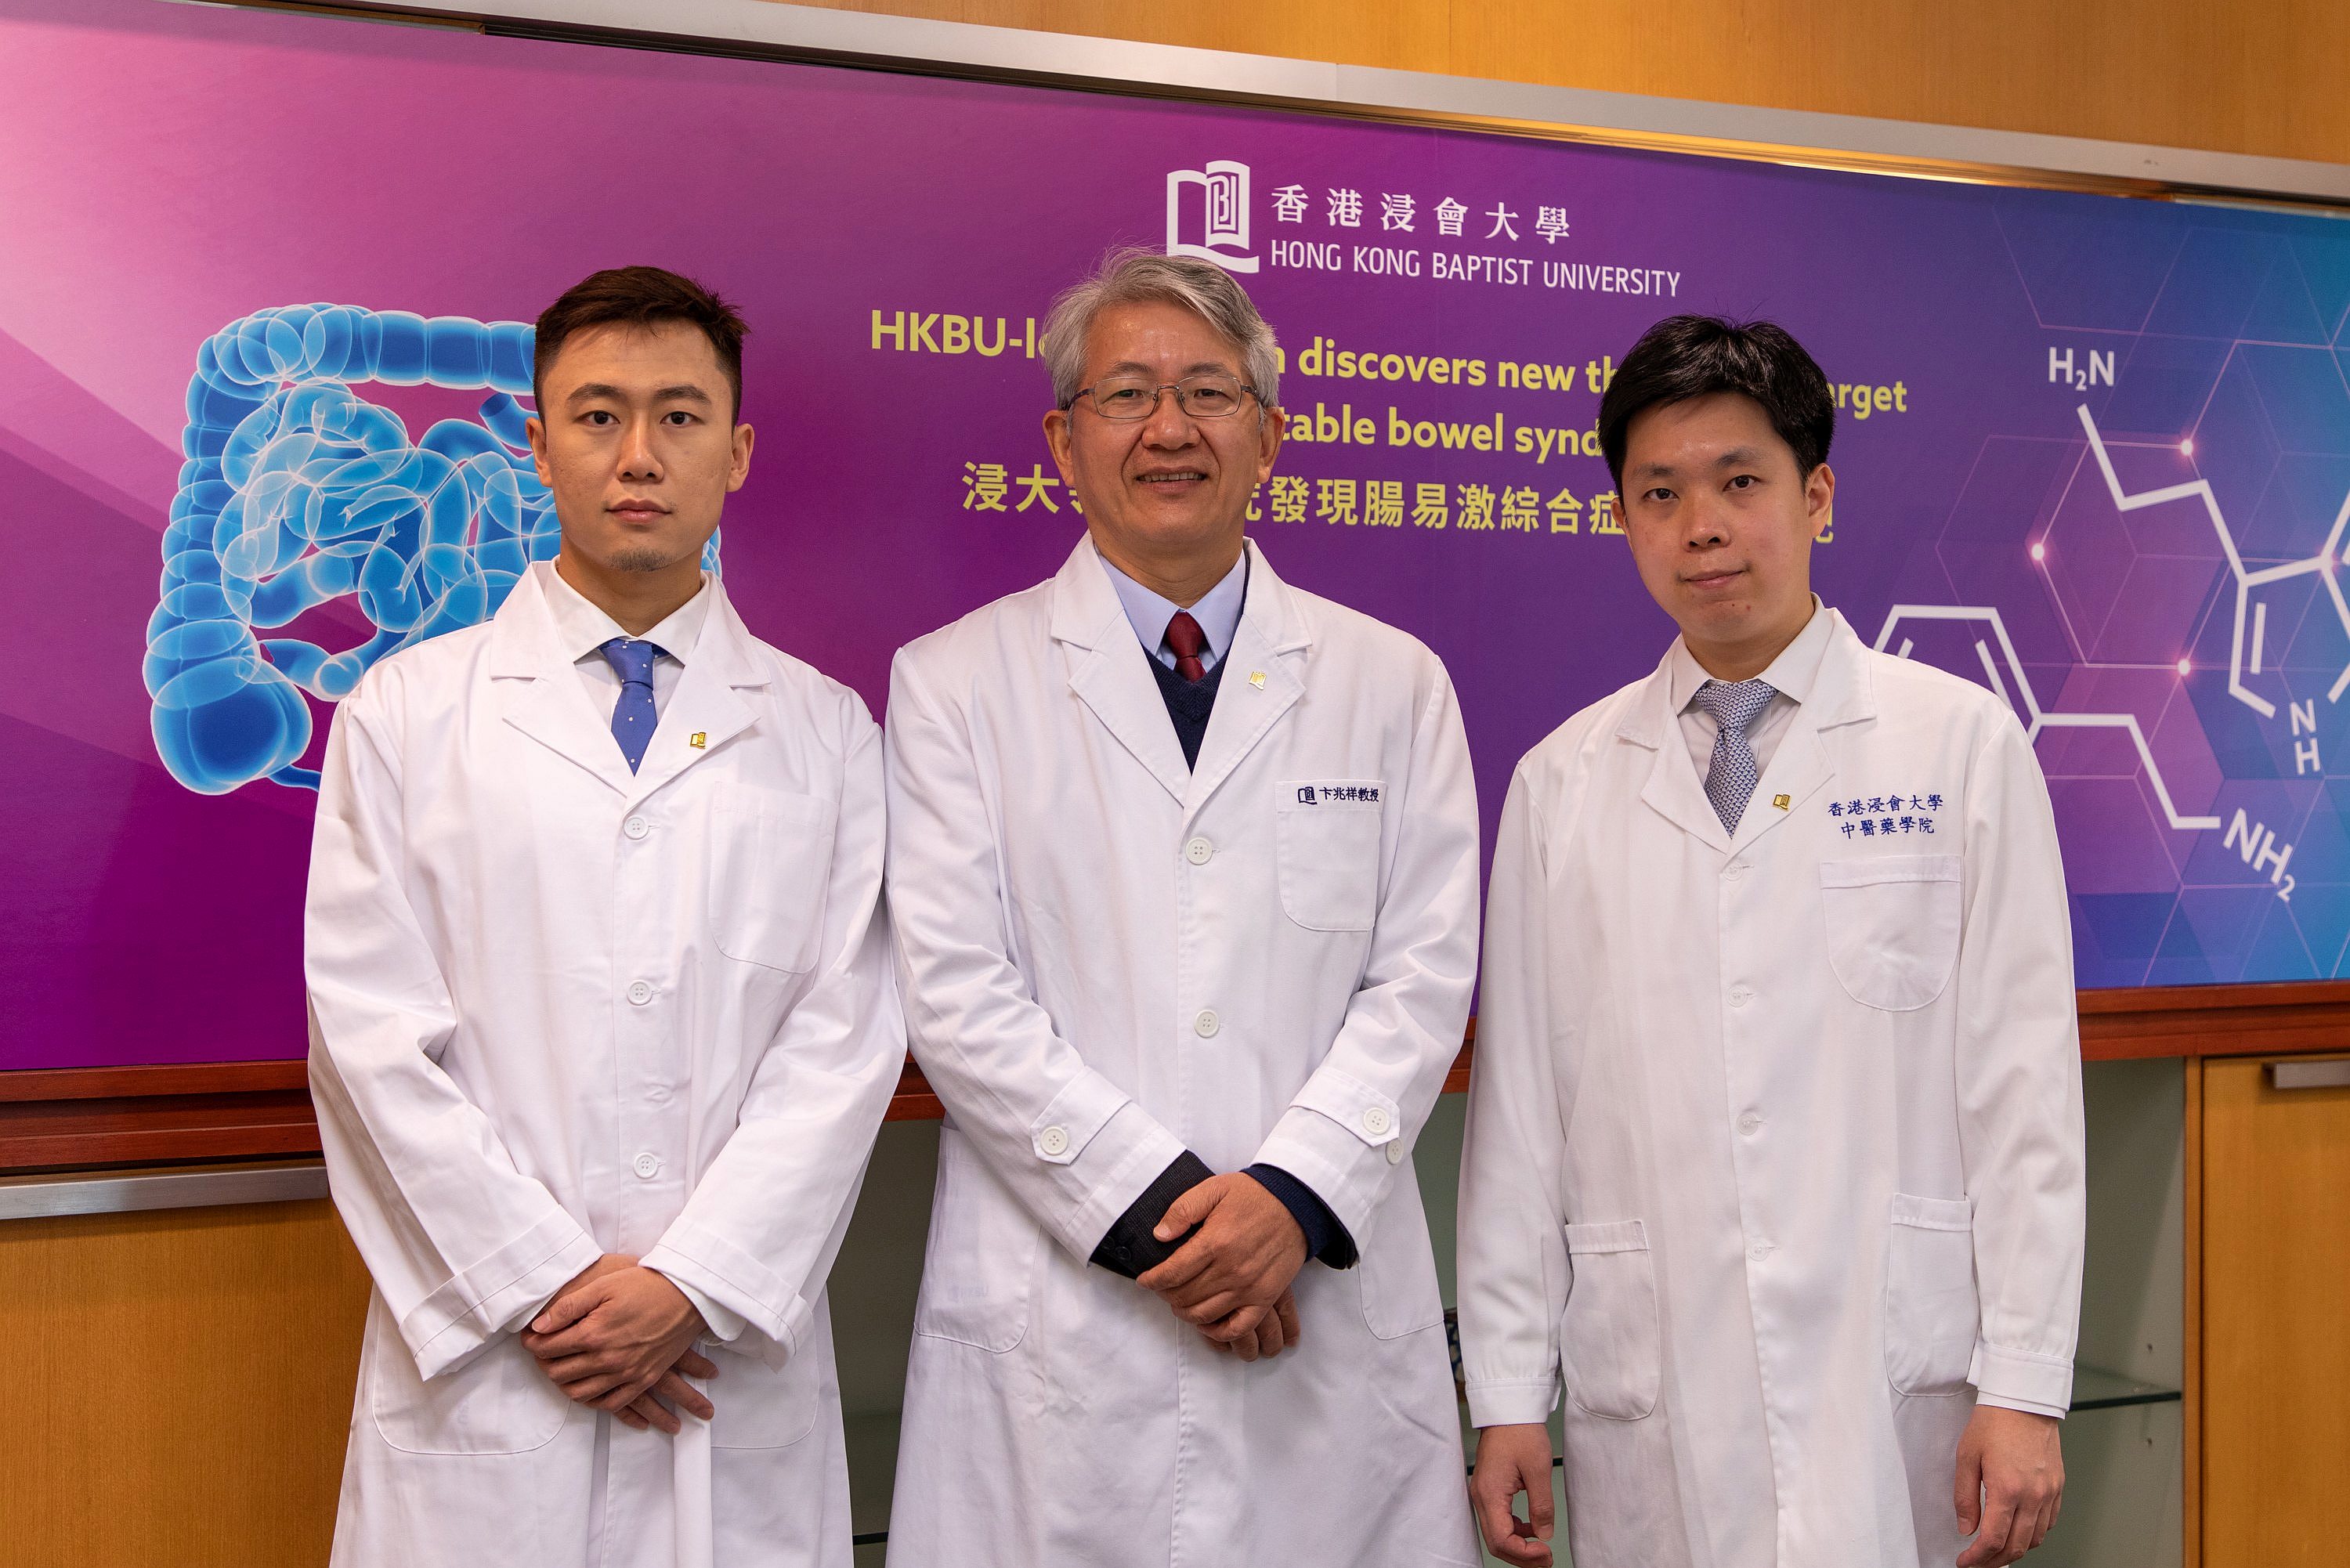 The research team of Professor Bian Zhaoxiang, Director of the Clinical Division and Tsang Shiu Tim Endowed Professor in Chinese Medicine Clinical Studies (middle); Dr Xavier Wong Hoi-leong, Assistant Professor of the Teaching and Research Division (right); and Dr Zhai Lixiang, Post-Doctoral Research Fellow (left) of SCM at HKBU, has shown for the first time that the human gut bacterium Ruminococcus gnavus is a major trigger factor of diarrhoea-predominant irritable bowel syndrome.